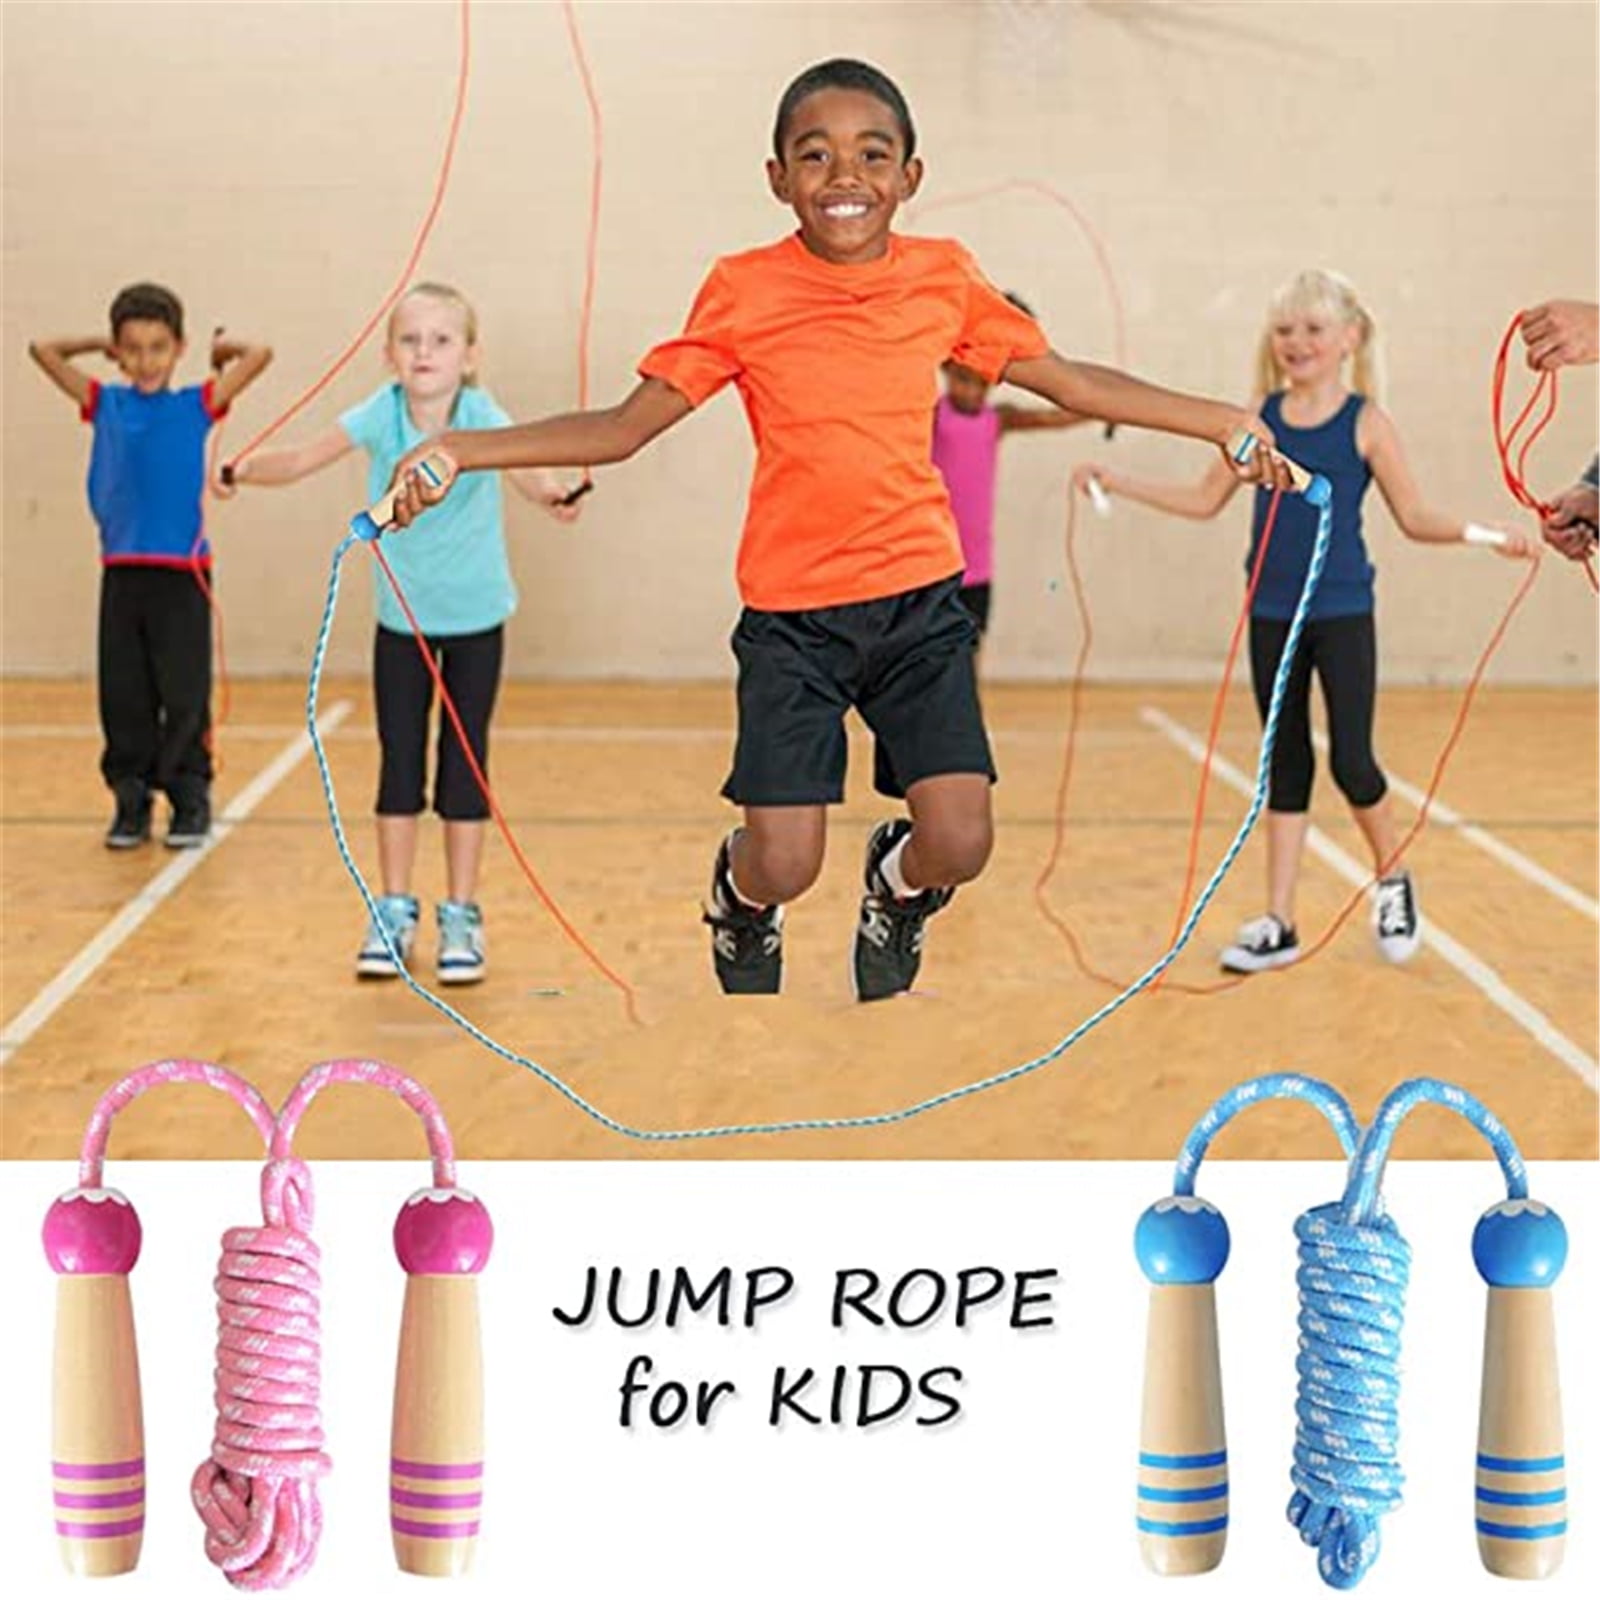 Weekend&Lifecan skipping ropes for children kids skipping rope jump rope ladies Jump Ropes for Outdoor Games jump rope for children,jump rope for exercise adjustable length